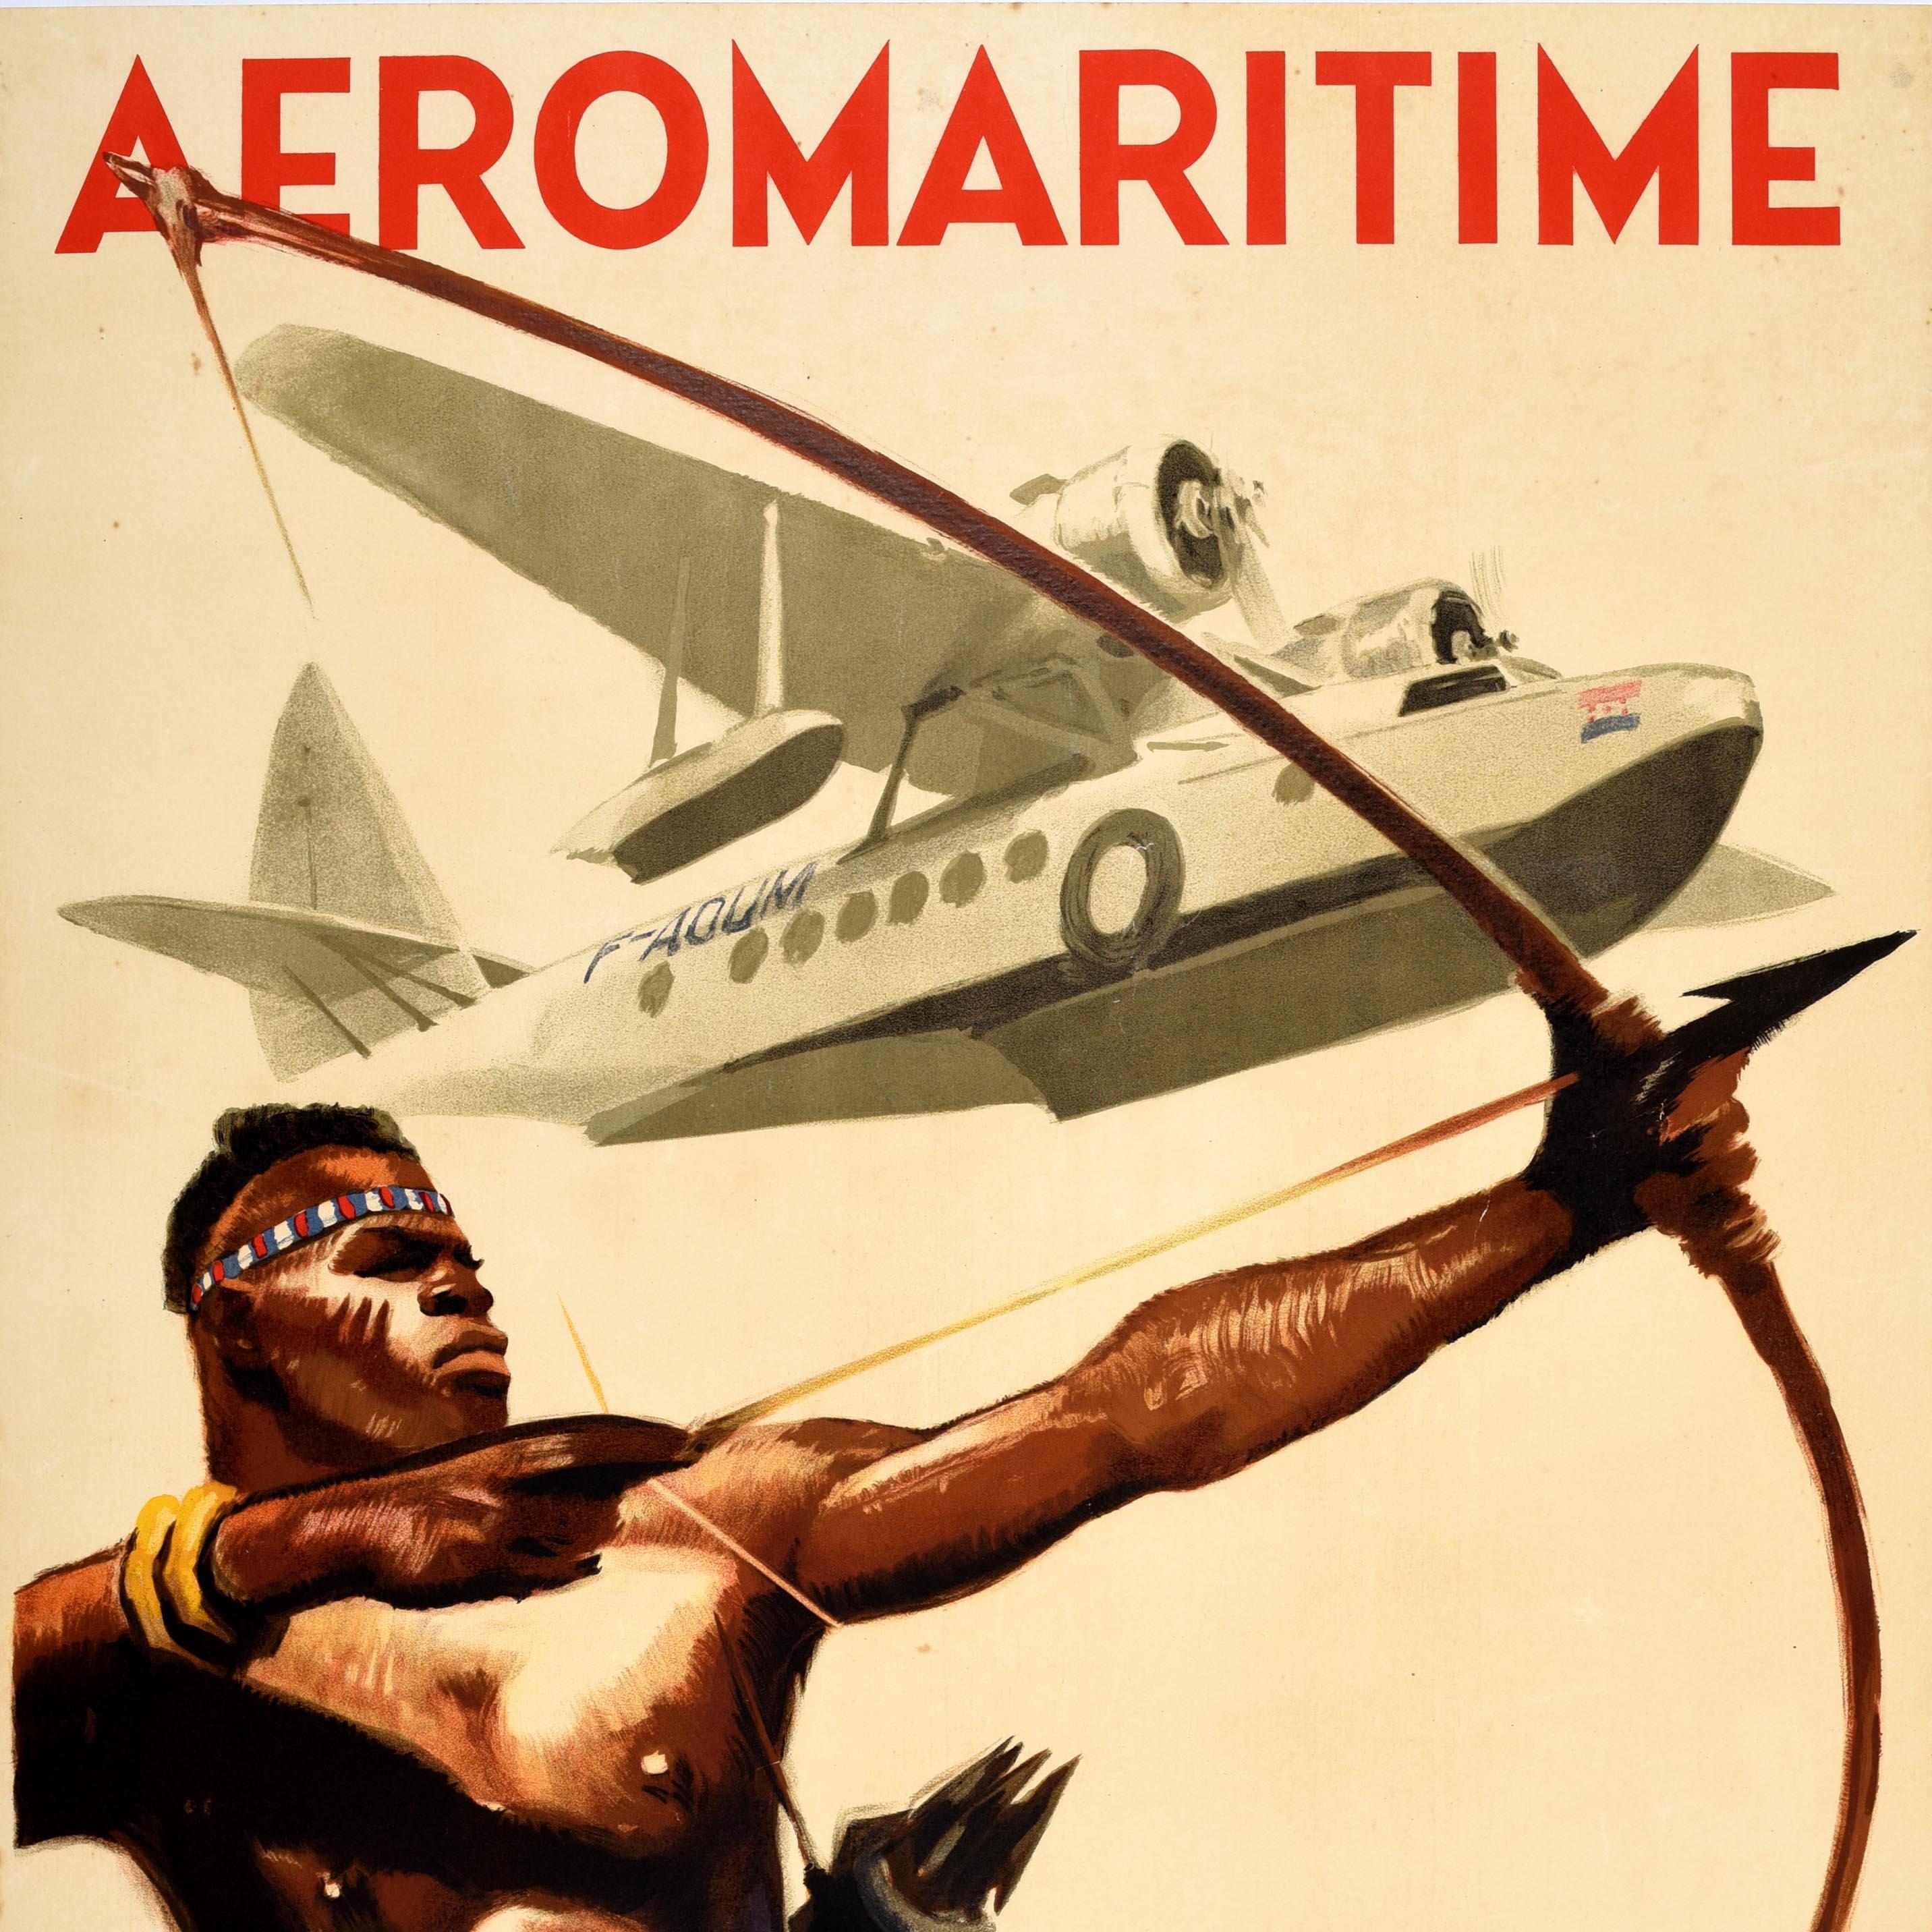 Original vintage travel poster for Aeromaritime - to the West coast of Africa, from Dakar in Senegal to Pointe Noire - Design by Albert Brenet (1903-2005) features an African Tribesman shooting a bow and arrow with a propellor plane flying in the